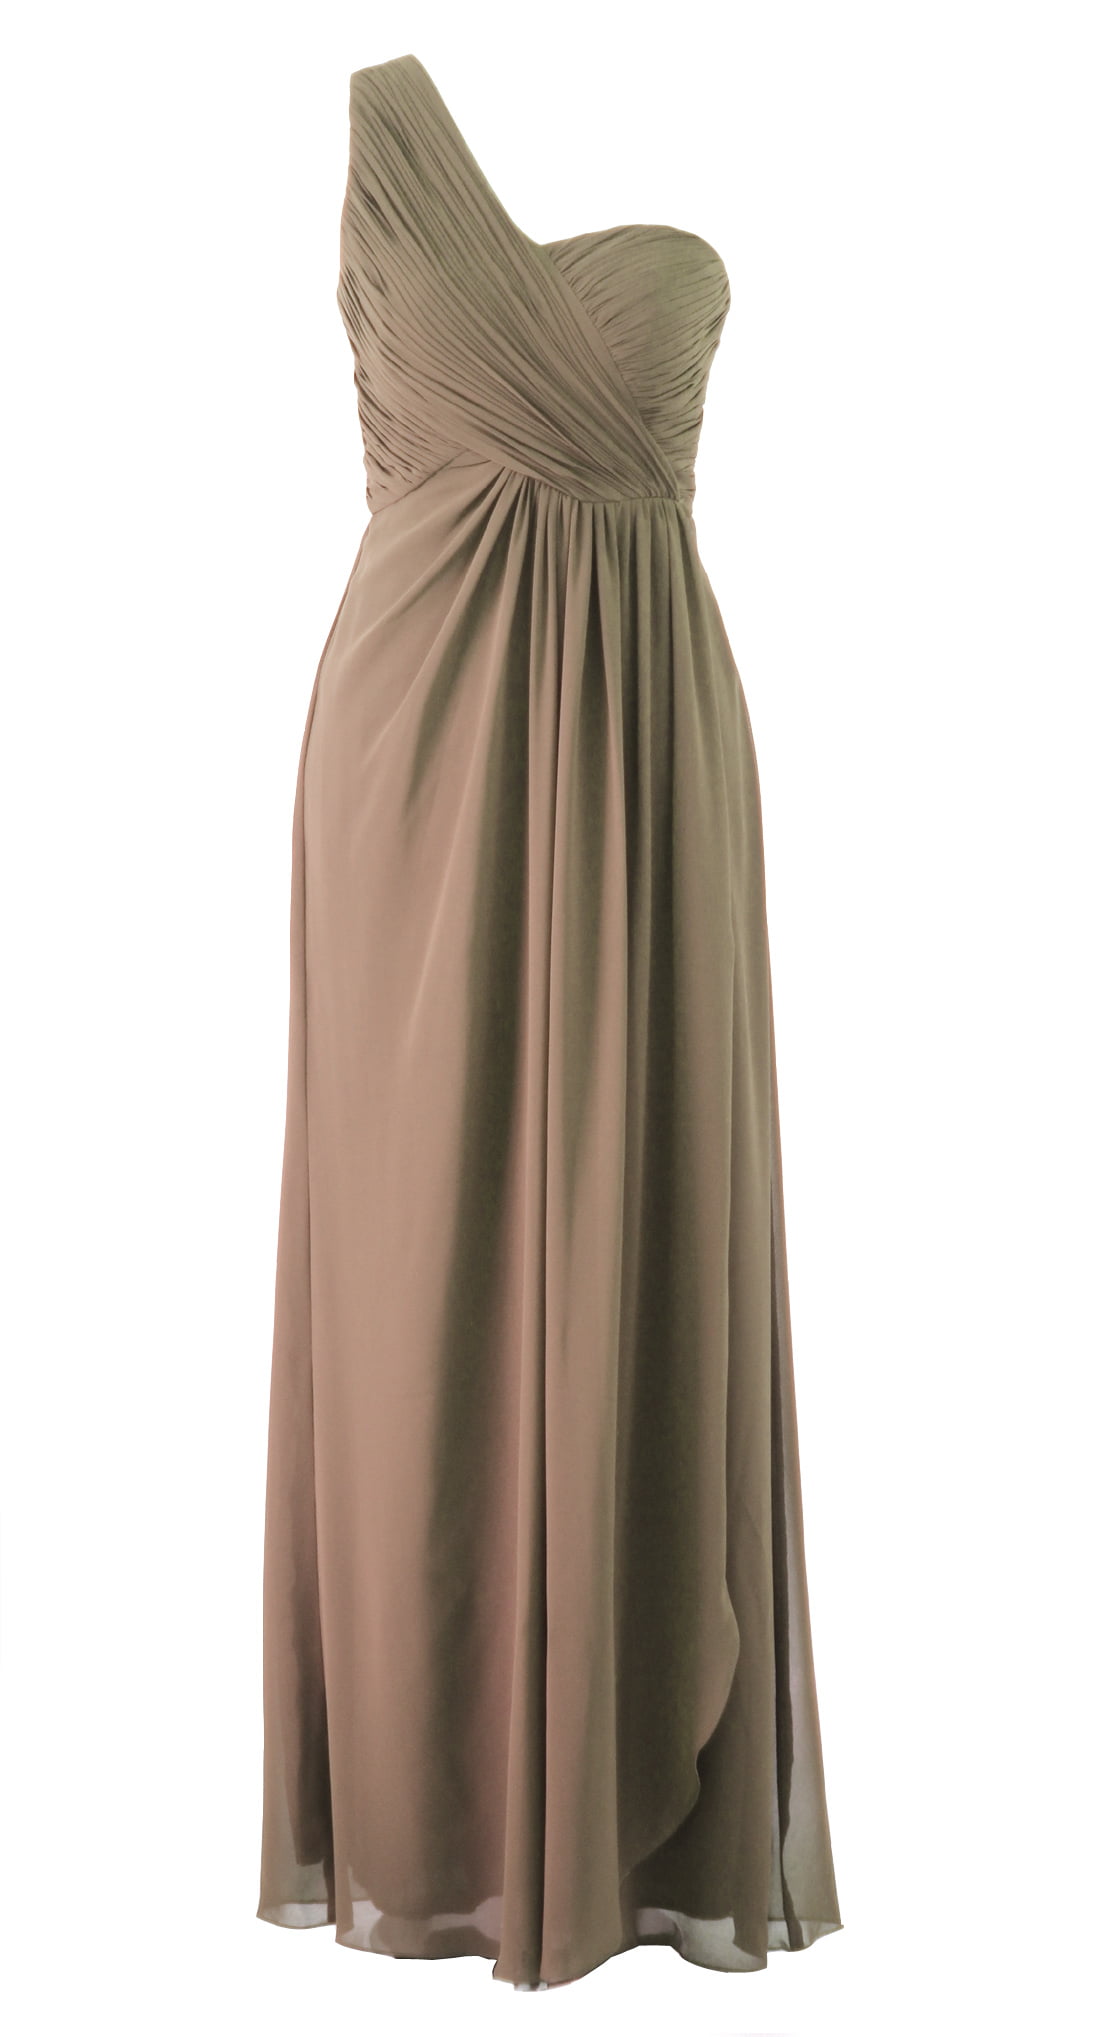 Now and Forever Womens One Shoulder Pleated Chiffon Bridesmaid Dress Long Formal Evening Prom Gown